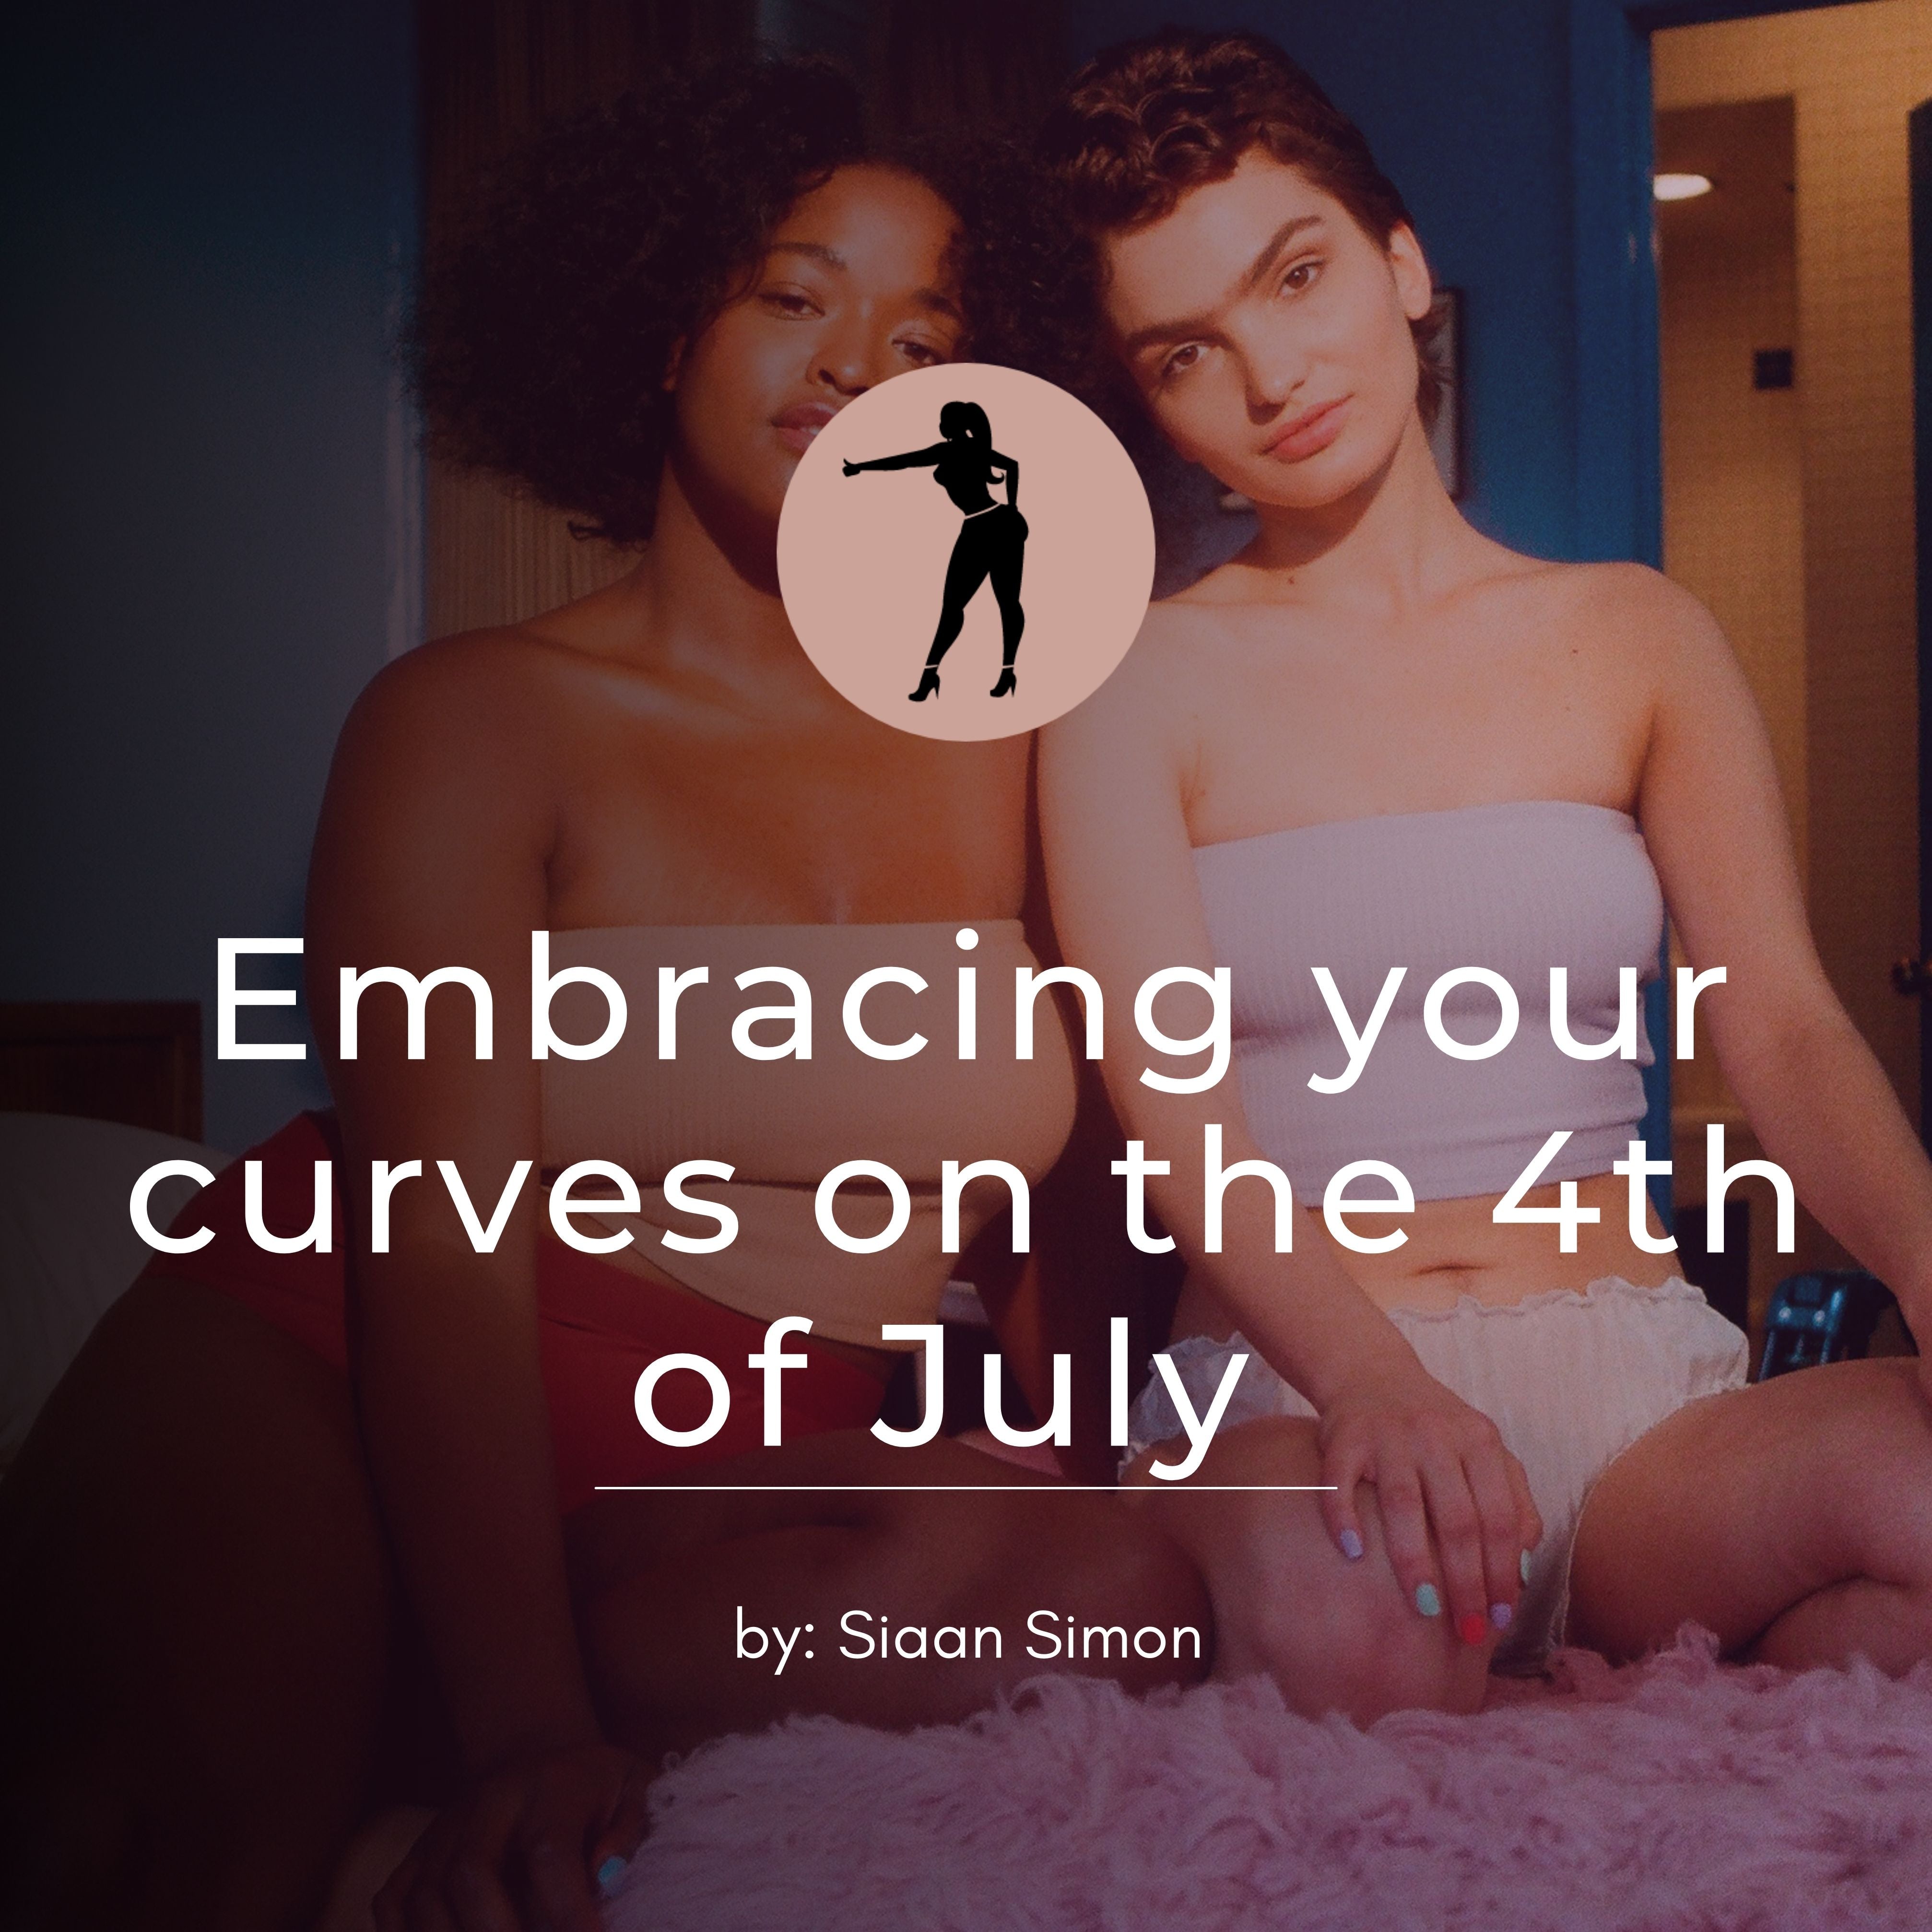 Embracing your curves on the 4th of July